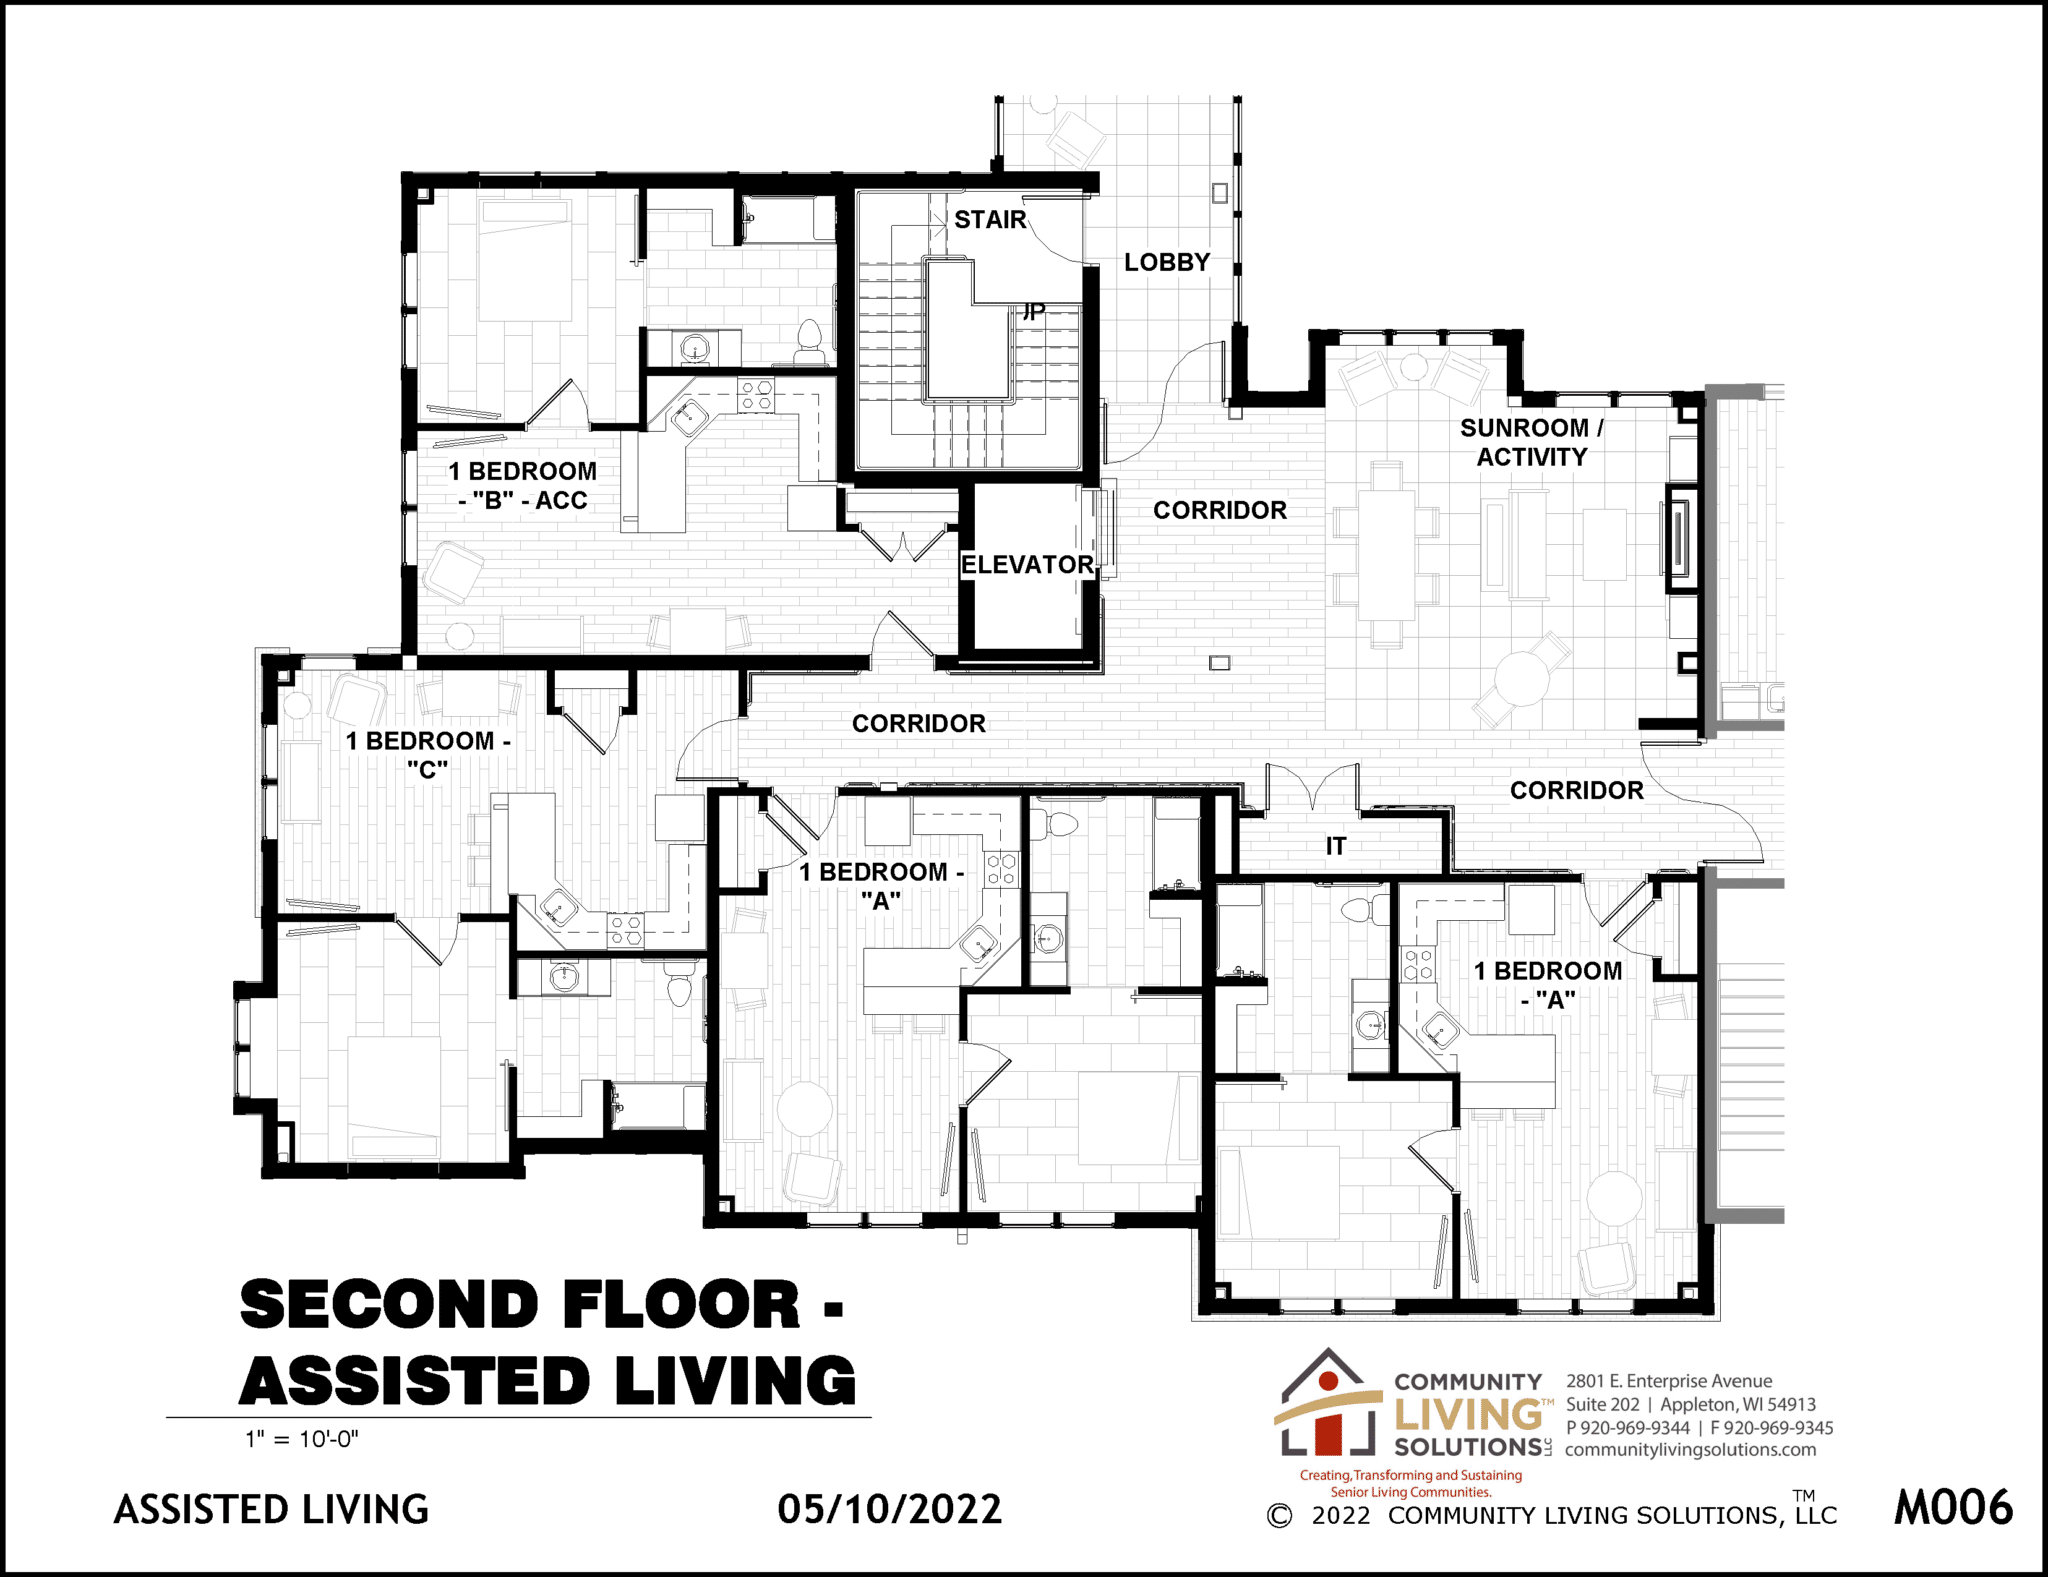 We will offer 3 options for floorplans of the added 1-bedroom apartments, which will add 4 apartments to each level of our private pay assisted living.